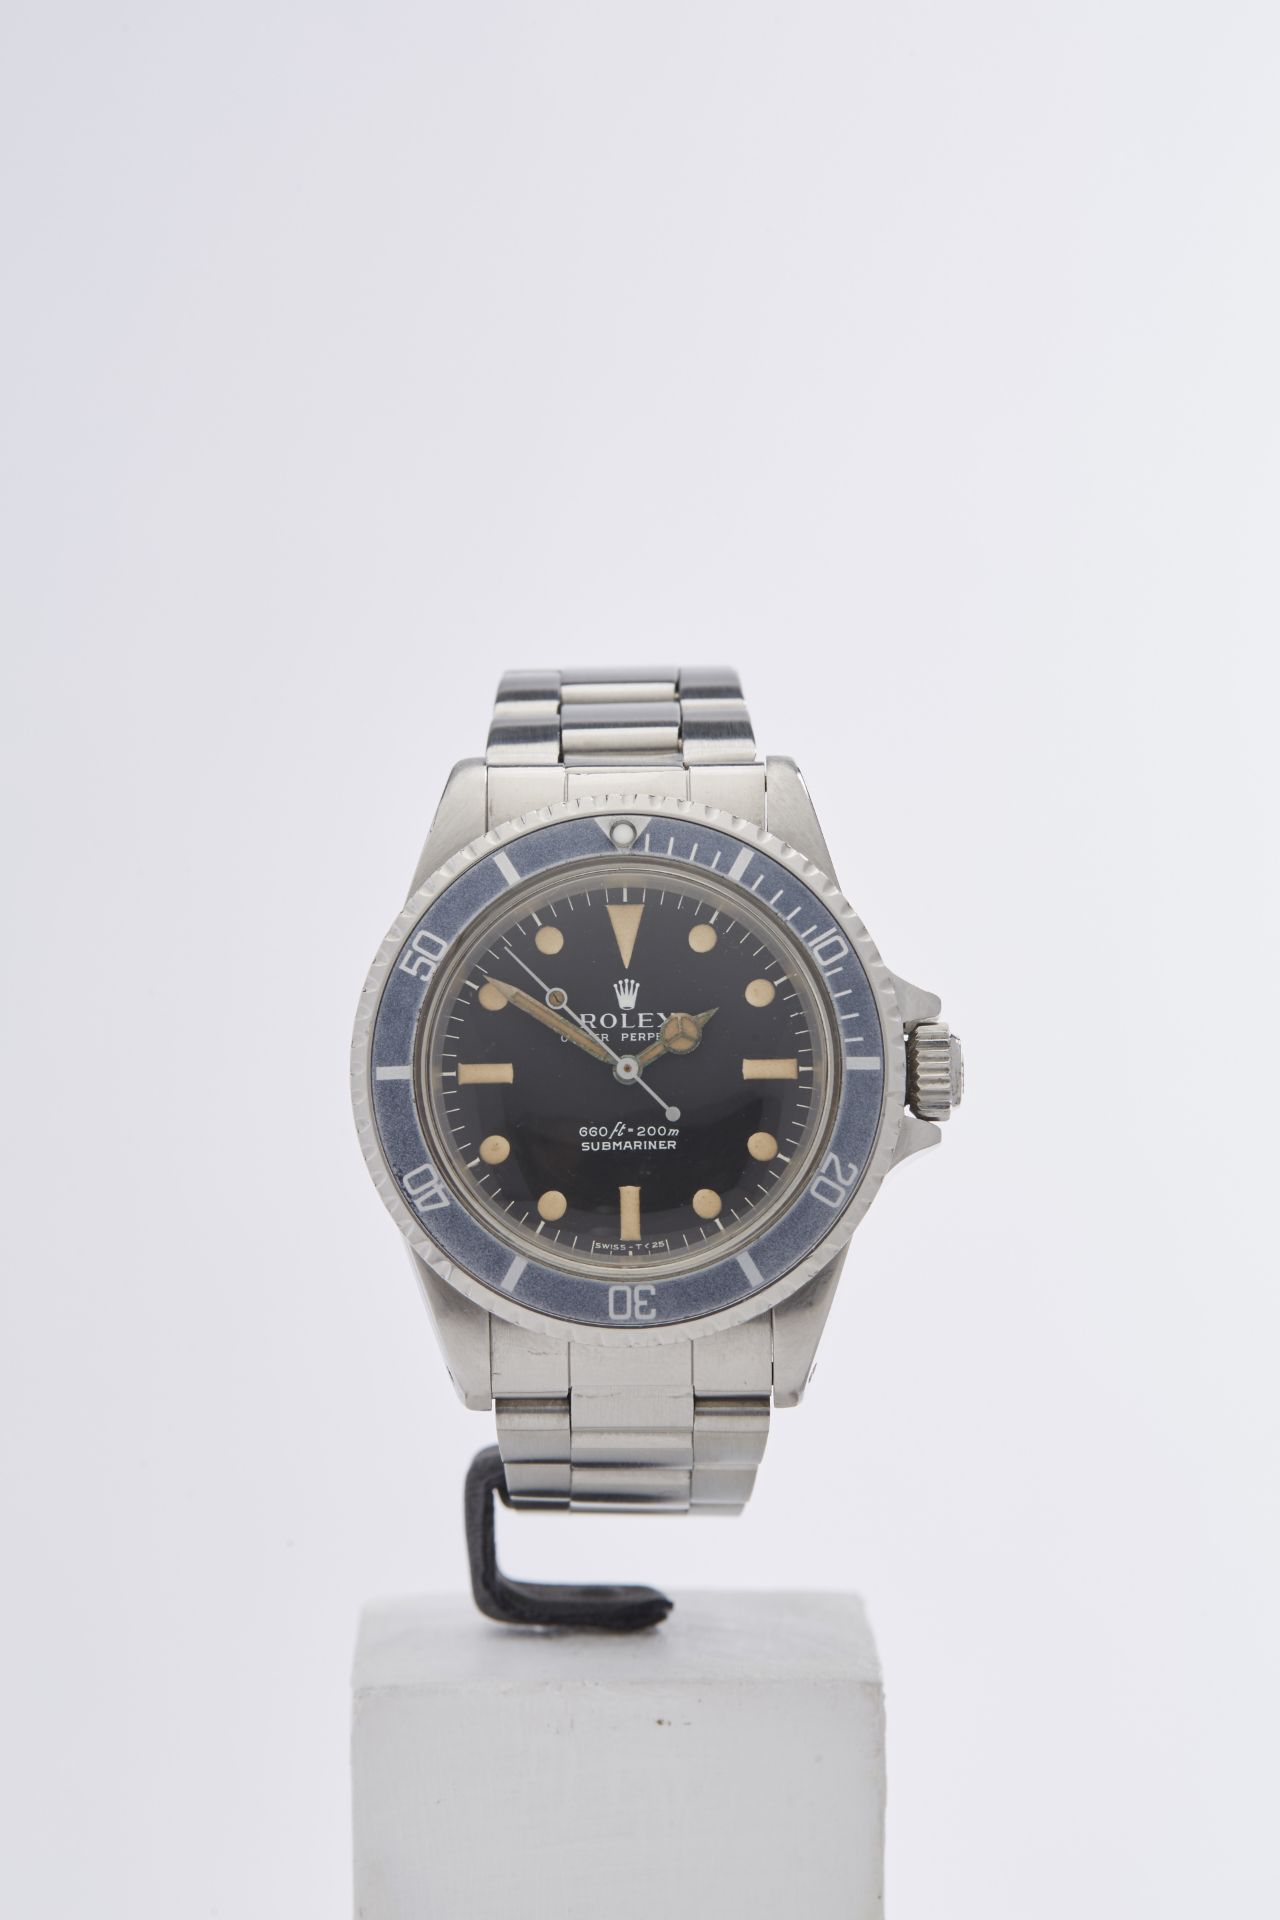 Rolex Submariner Serif Dial 40mm Stainless Steel 5513 - Image 7 of 15